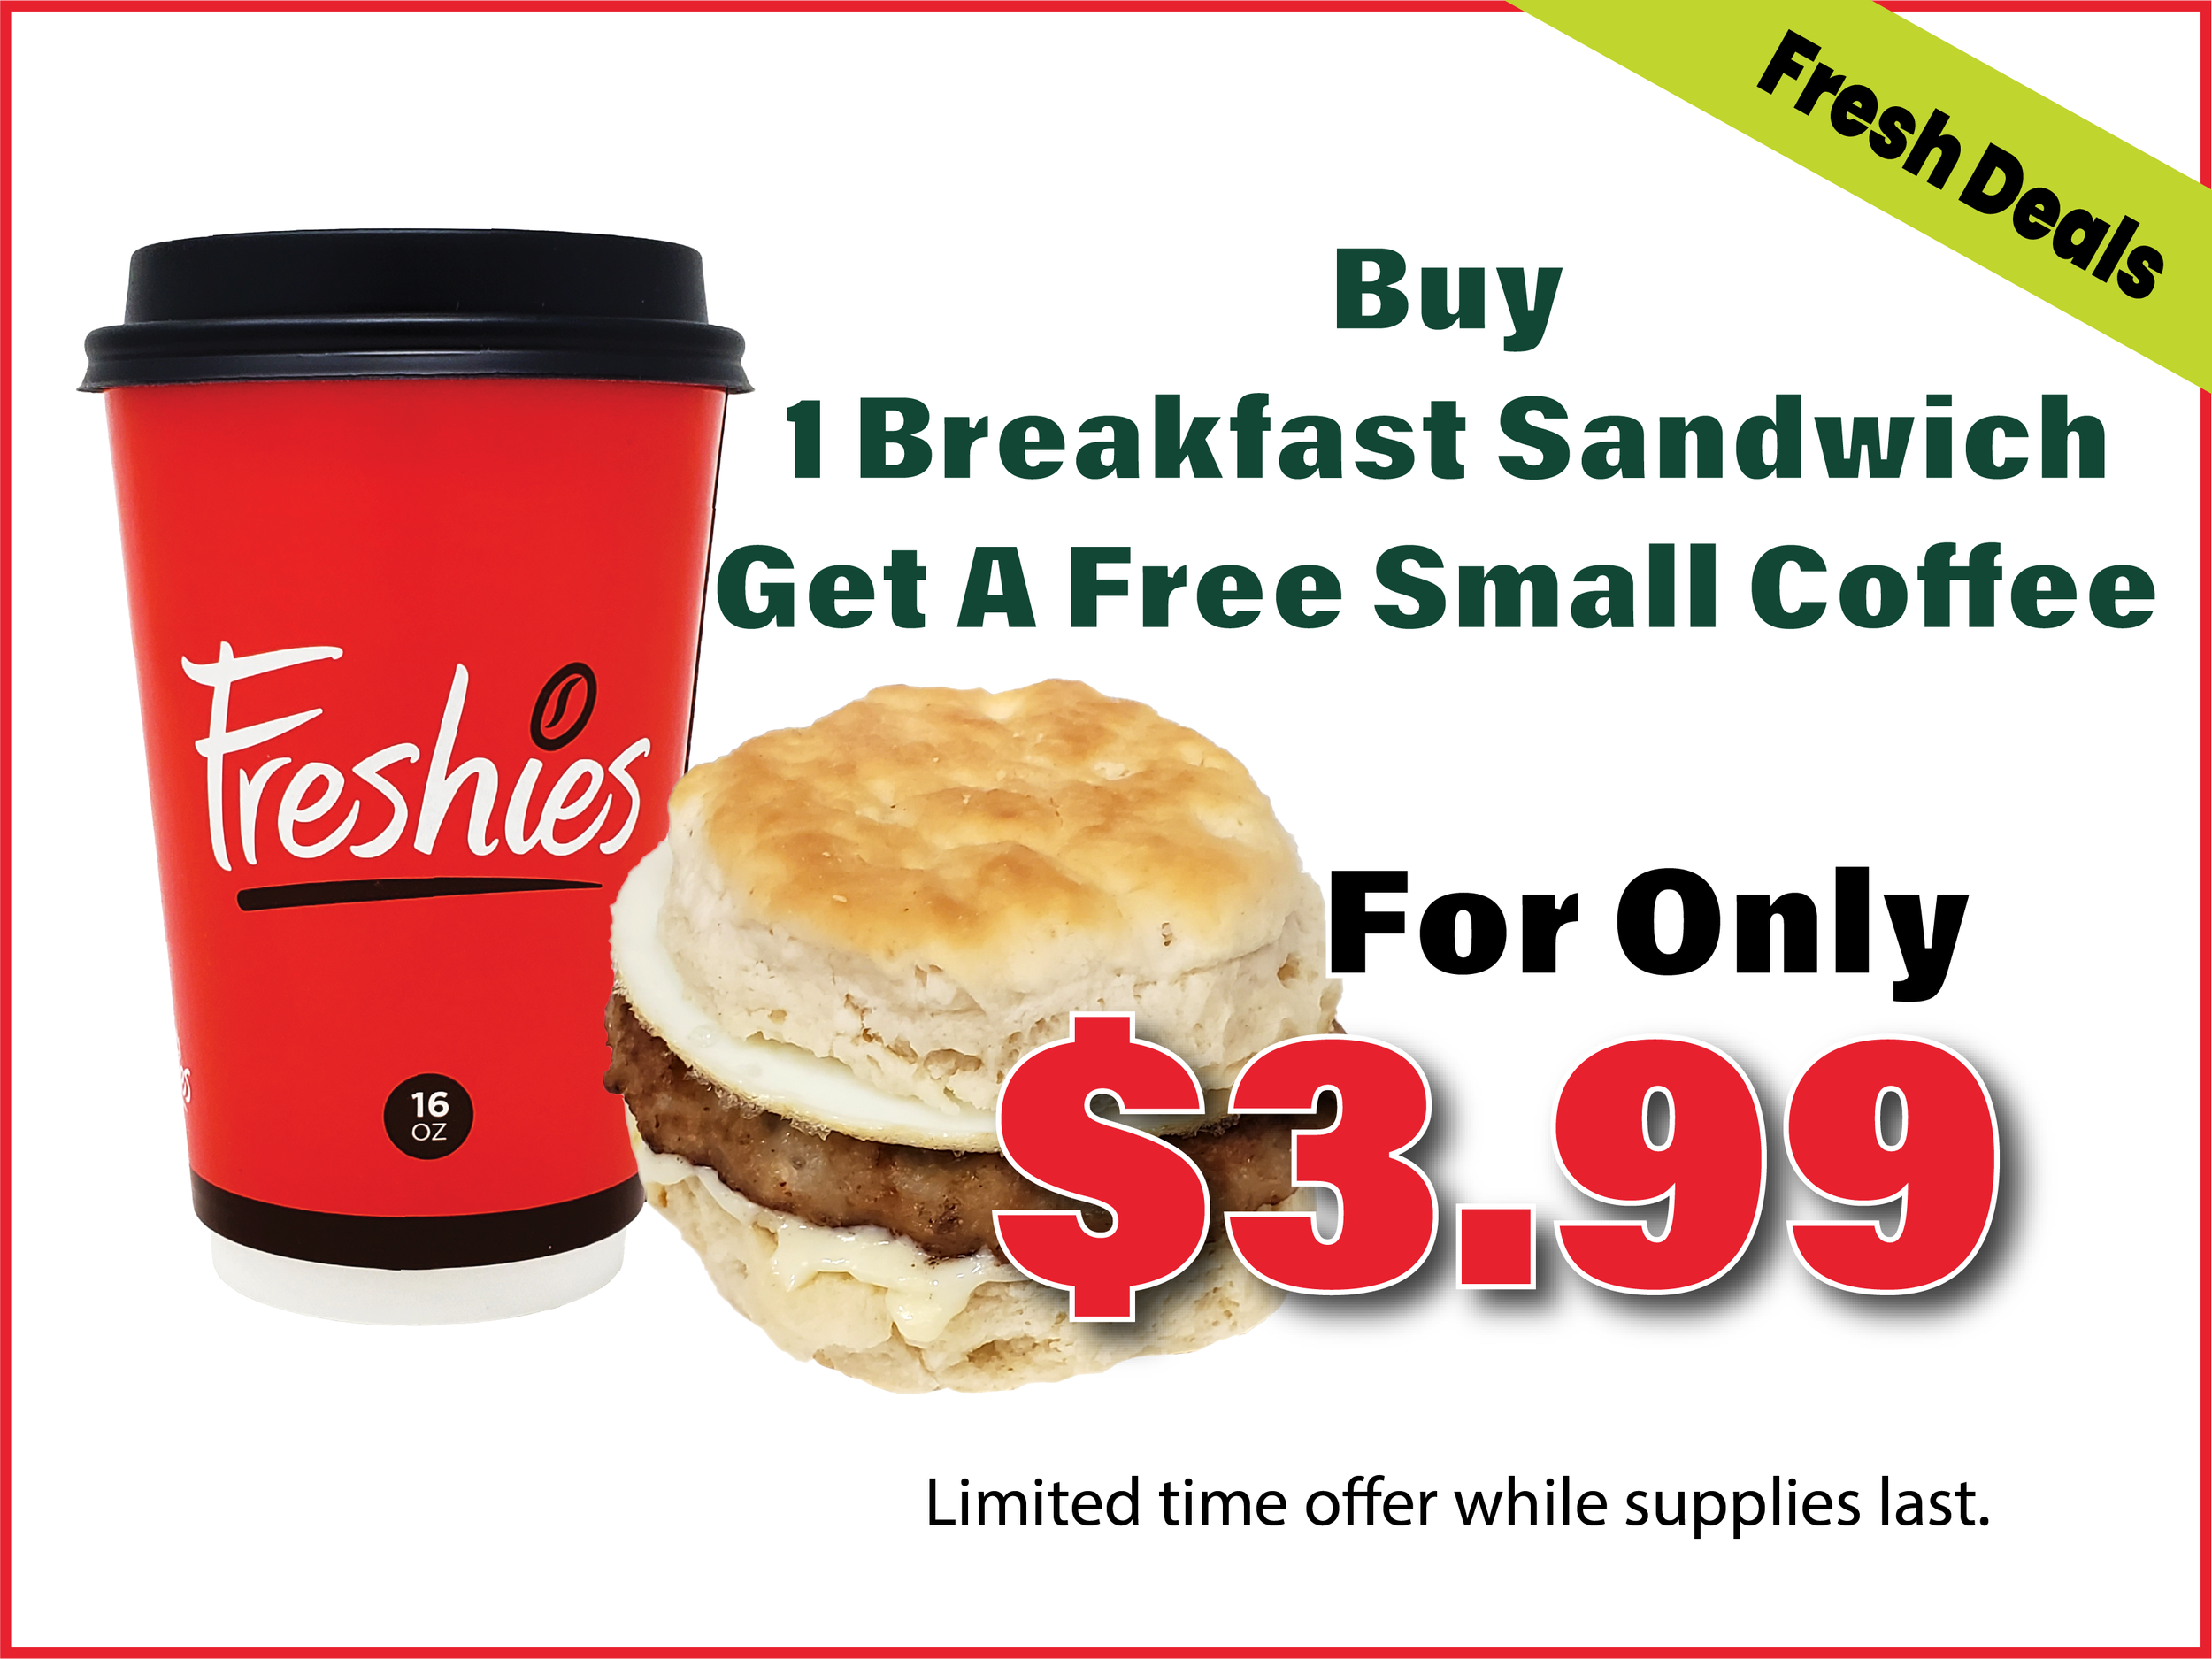 Discounted breakfast packages